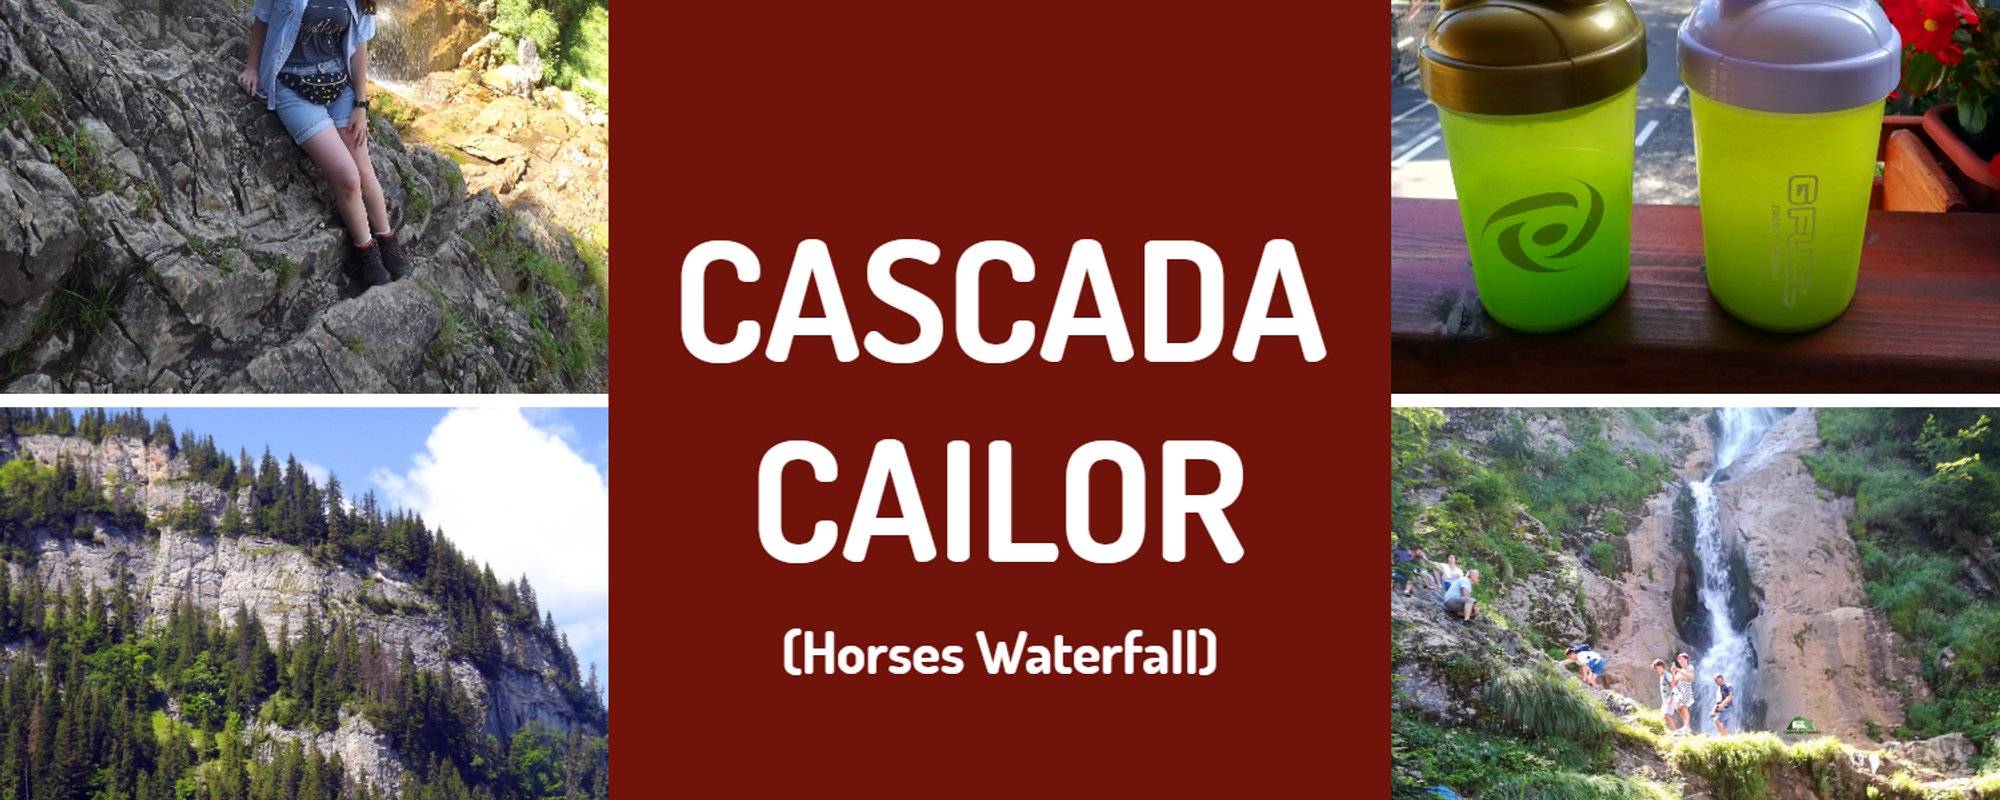 Let's travel together #95 - Cascada Cailor (Horses Waterfall)